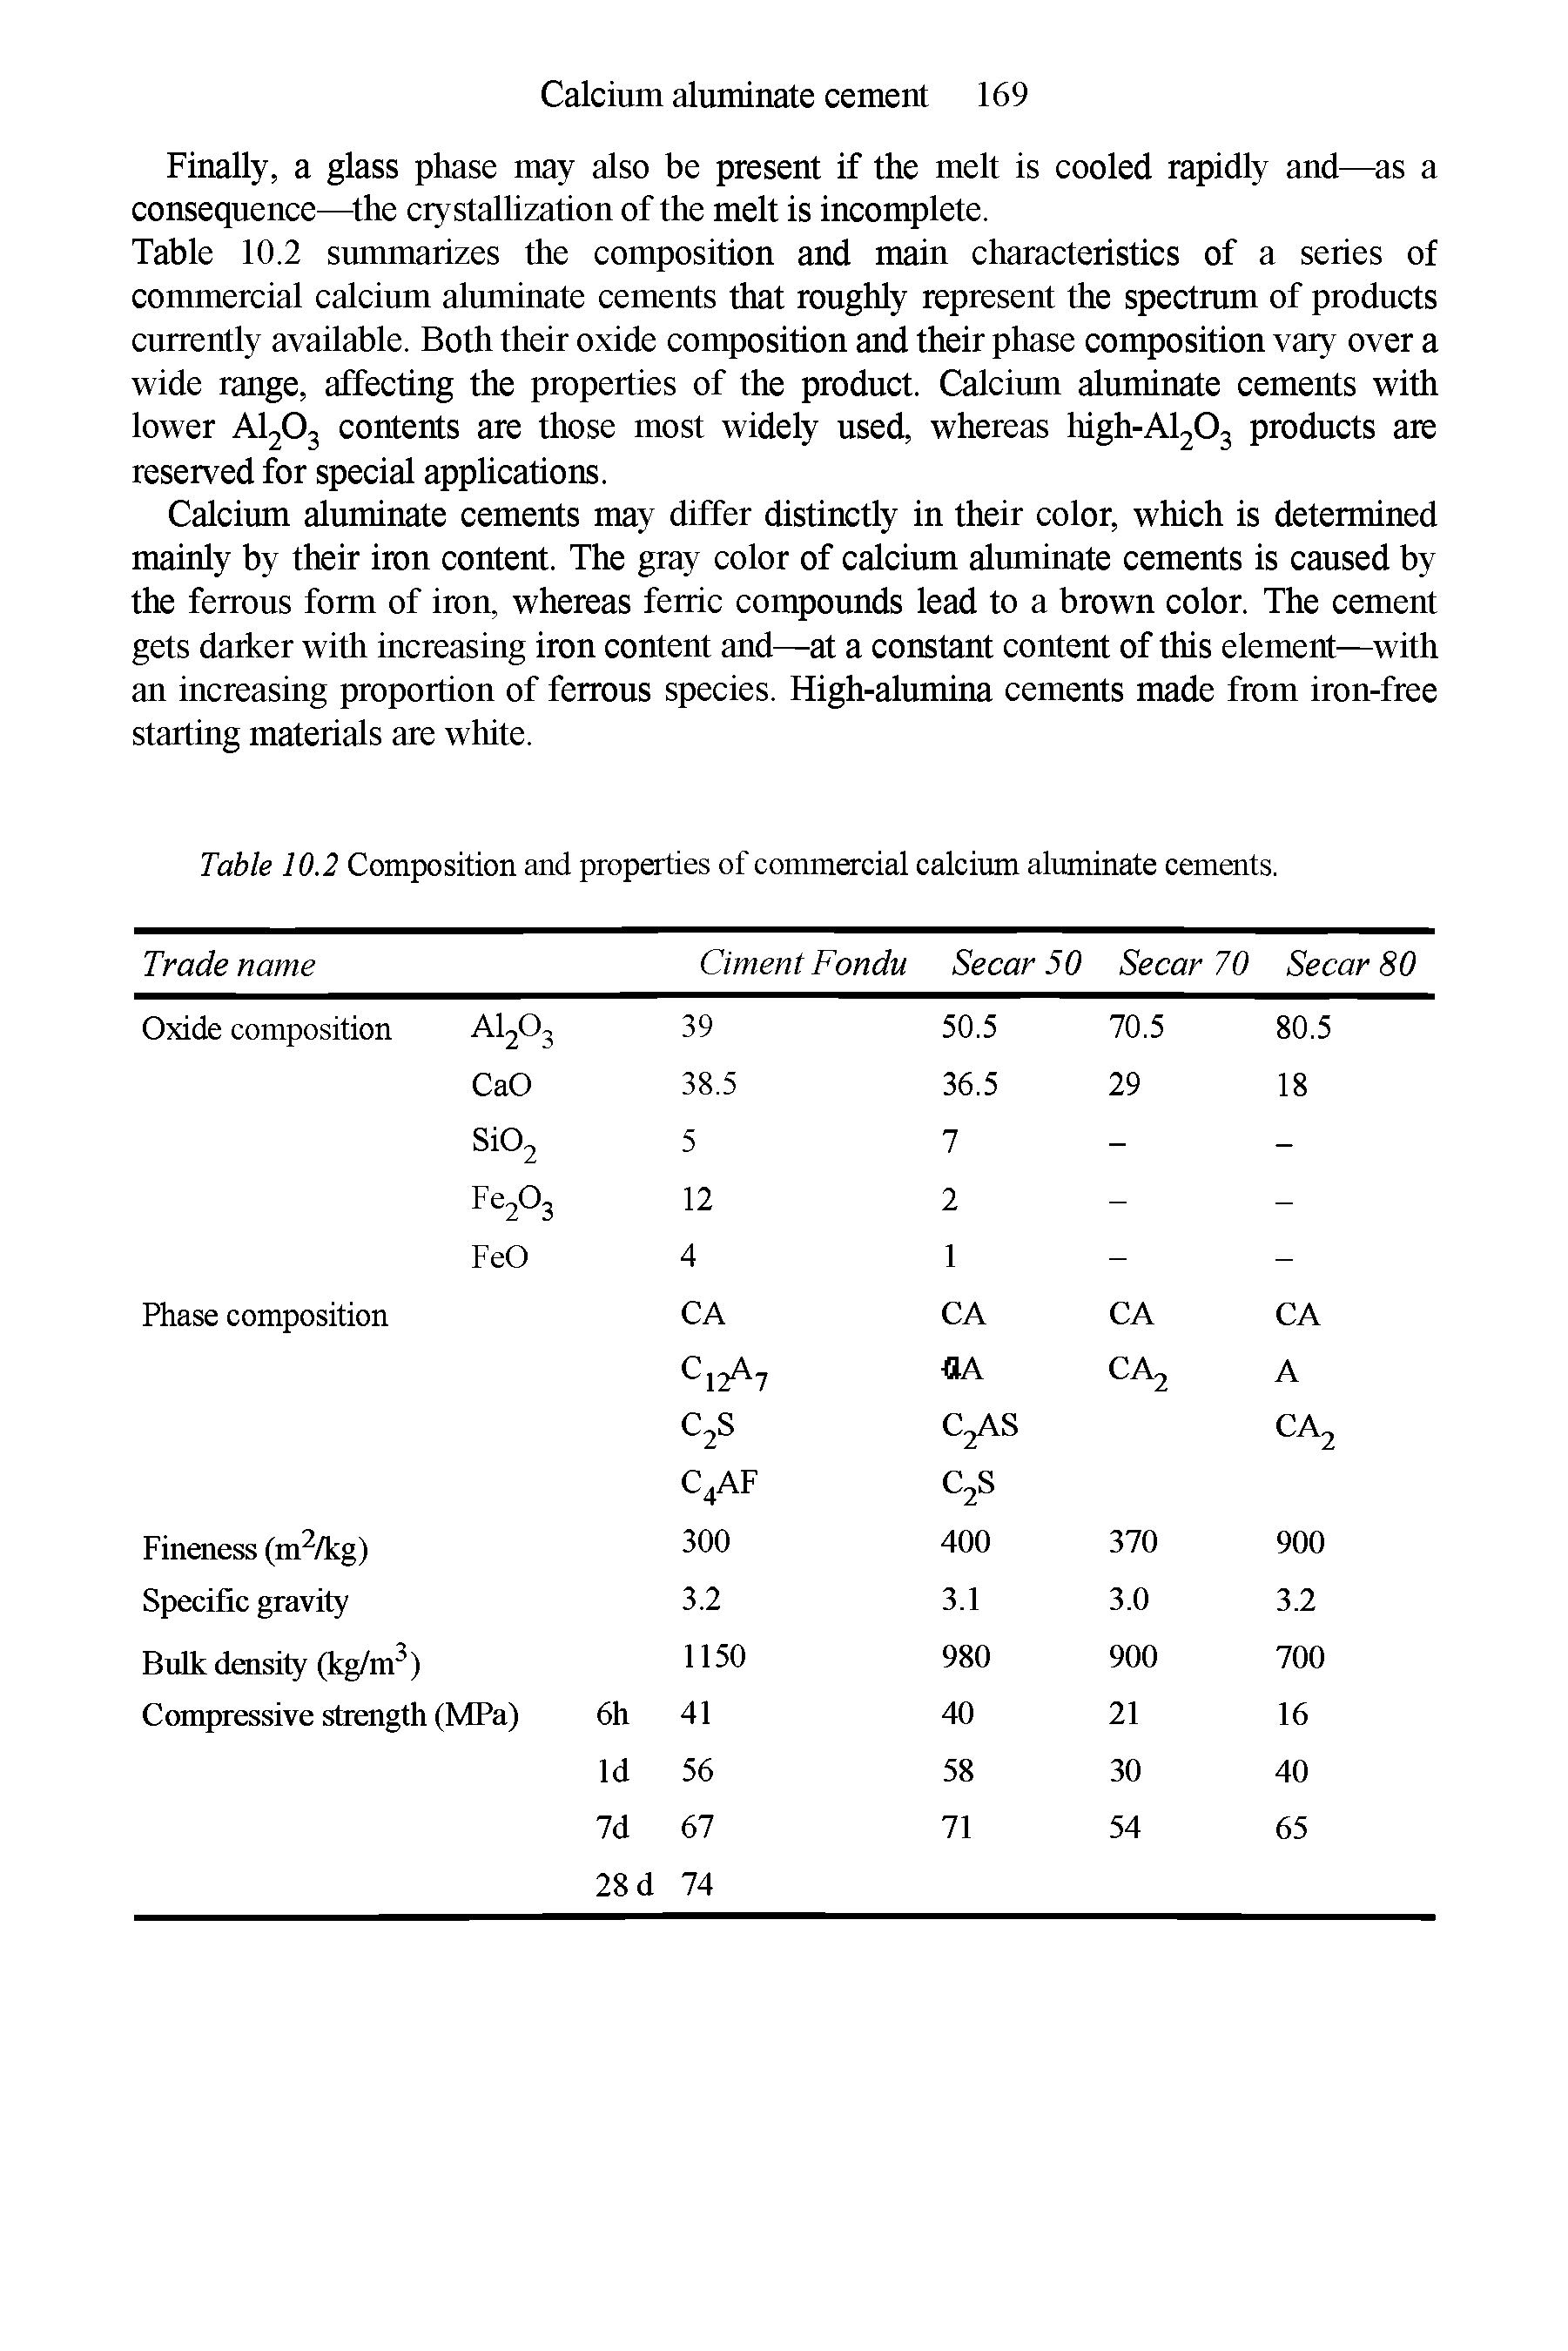 Table 10.2 Composition and properties of commercial calcium aluminate cements.